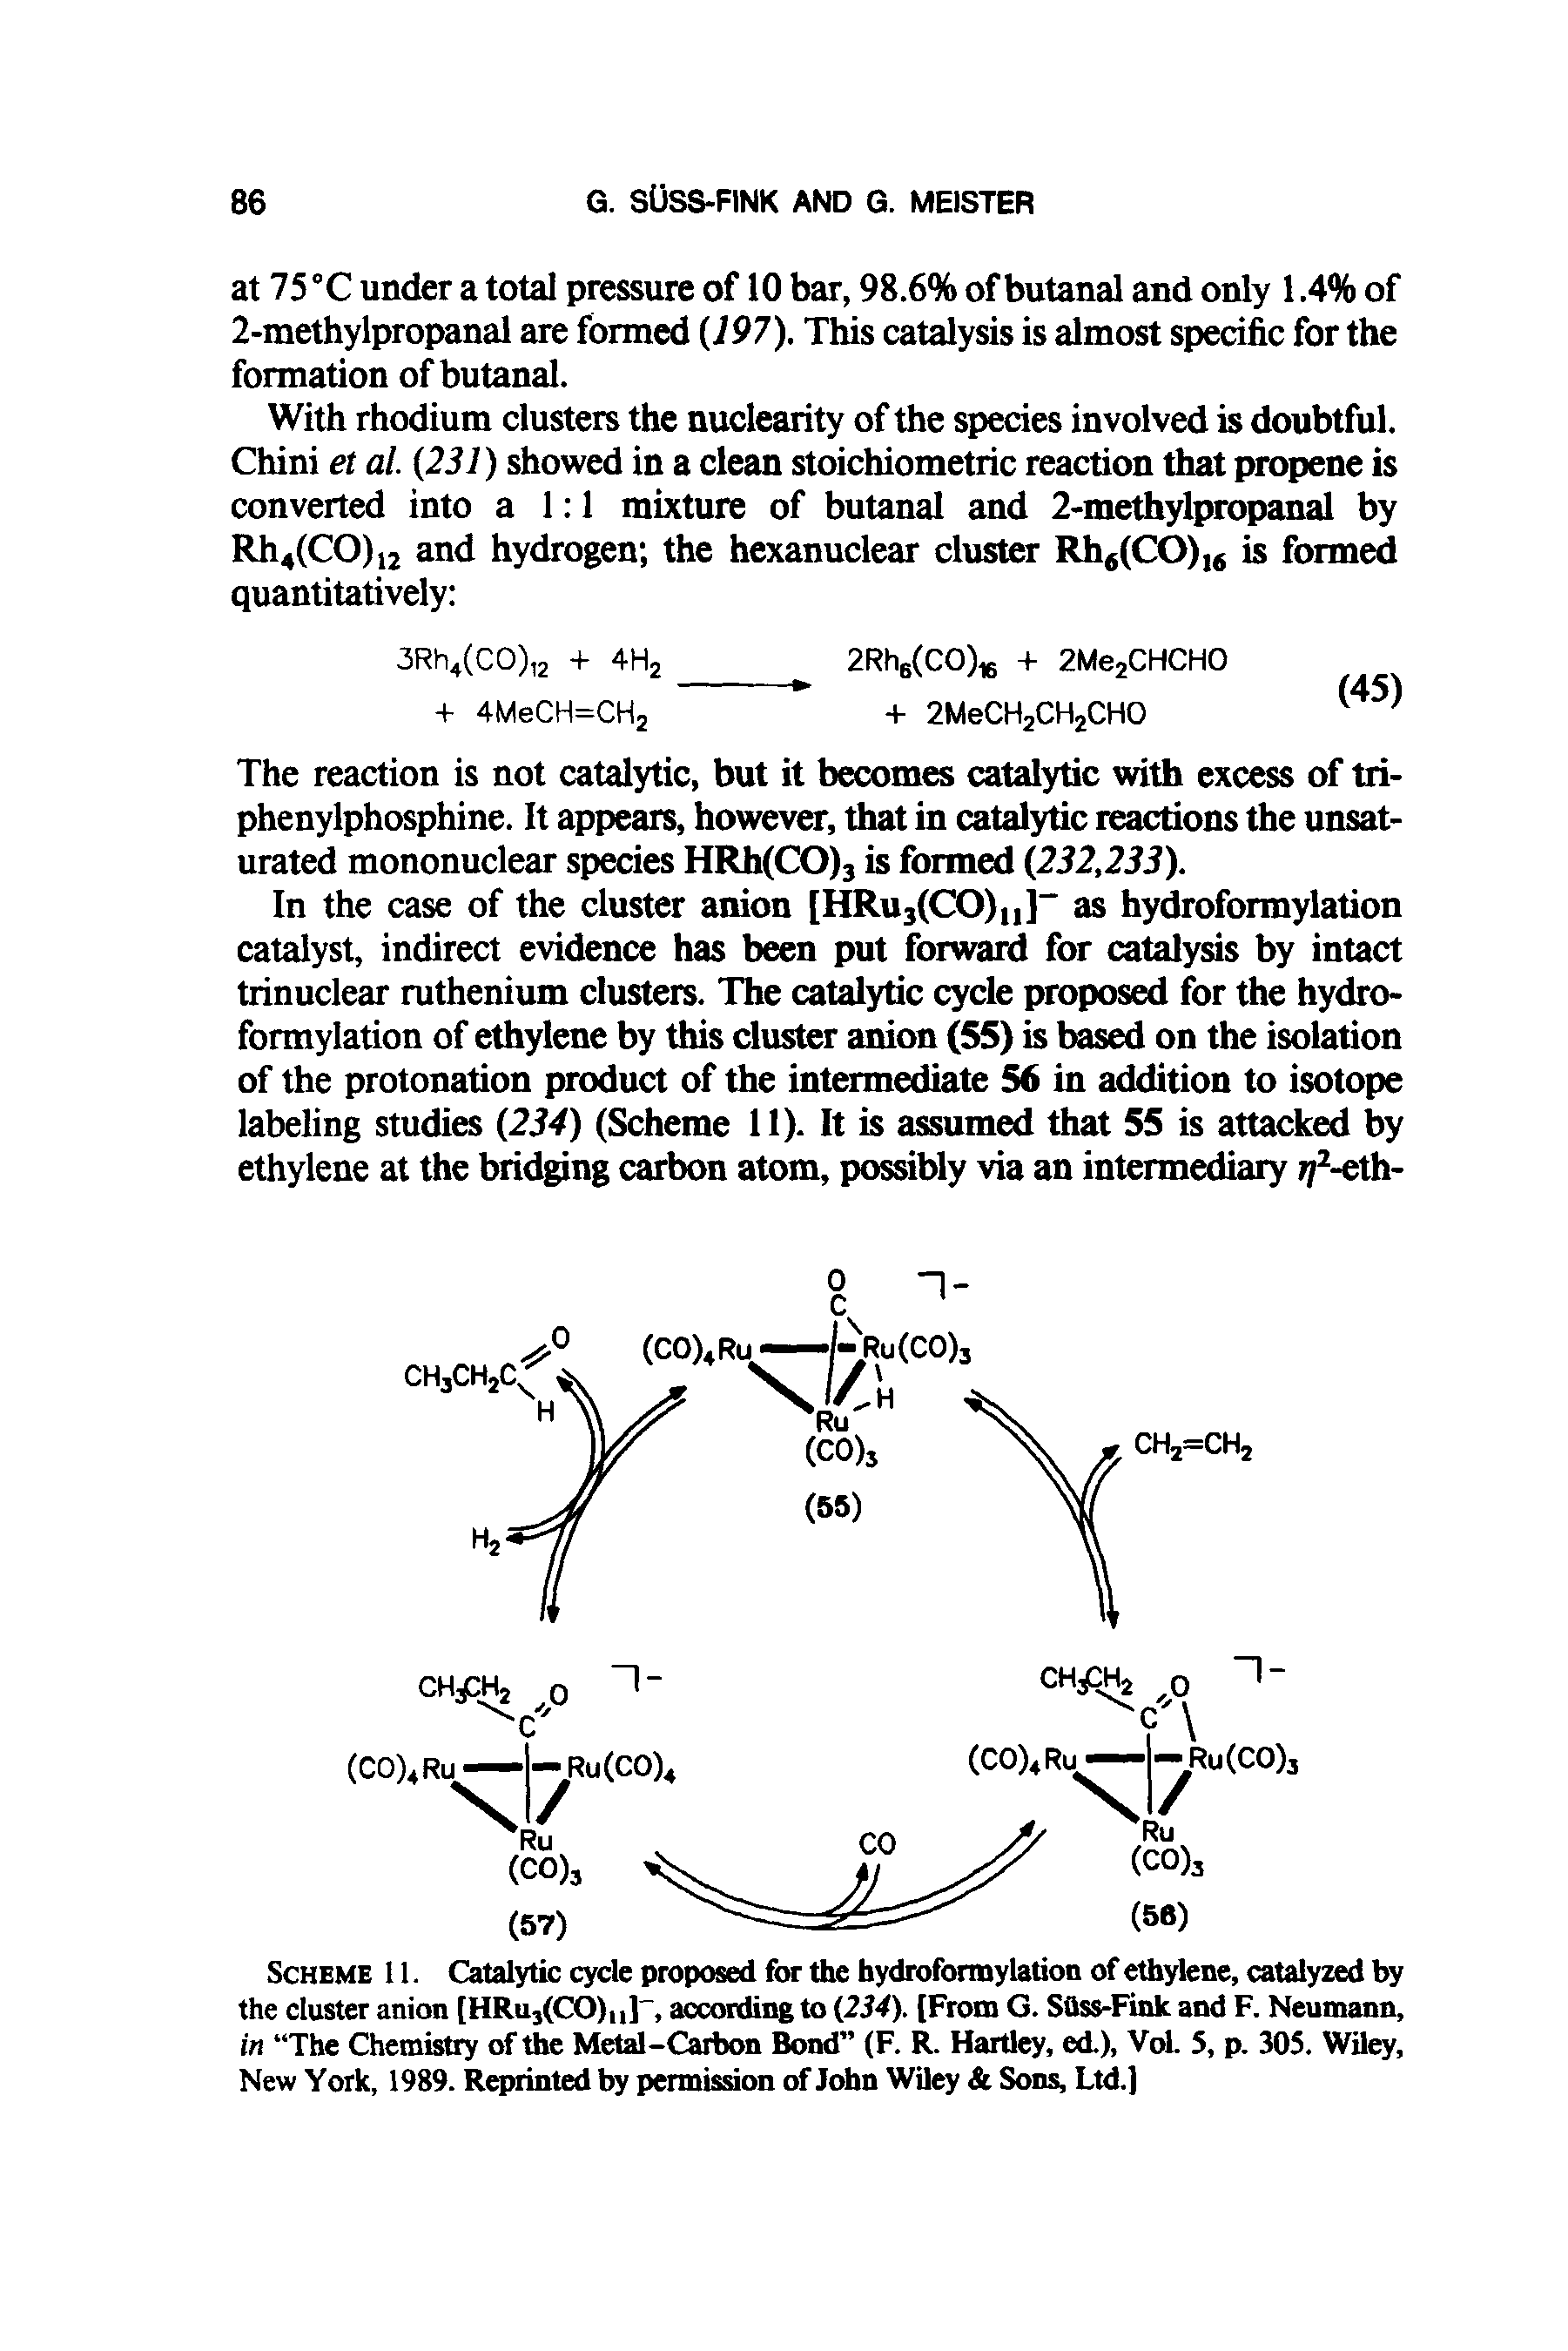 Scheme 11. Catalytic cycle proposed for the hydroformylation of ethylene, catalyzed by the cluster anion [HRu3(CO)u], according to (234). [From G. Sttss-Fink and F. Neumann, in The Chemistry of the Metal-Carbon Bond (F. R. Hartley, ed.), Vol. 5, p. 305. Wiley, New York, 1989. Reprinted by permission of John Wiley Sons, Ltd.]...